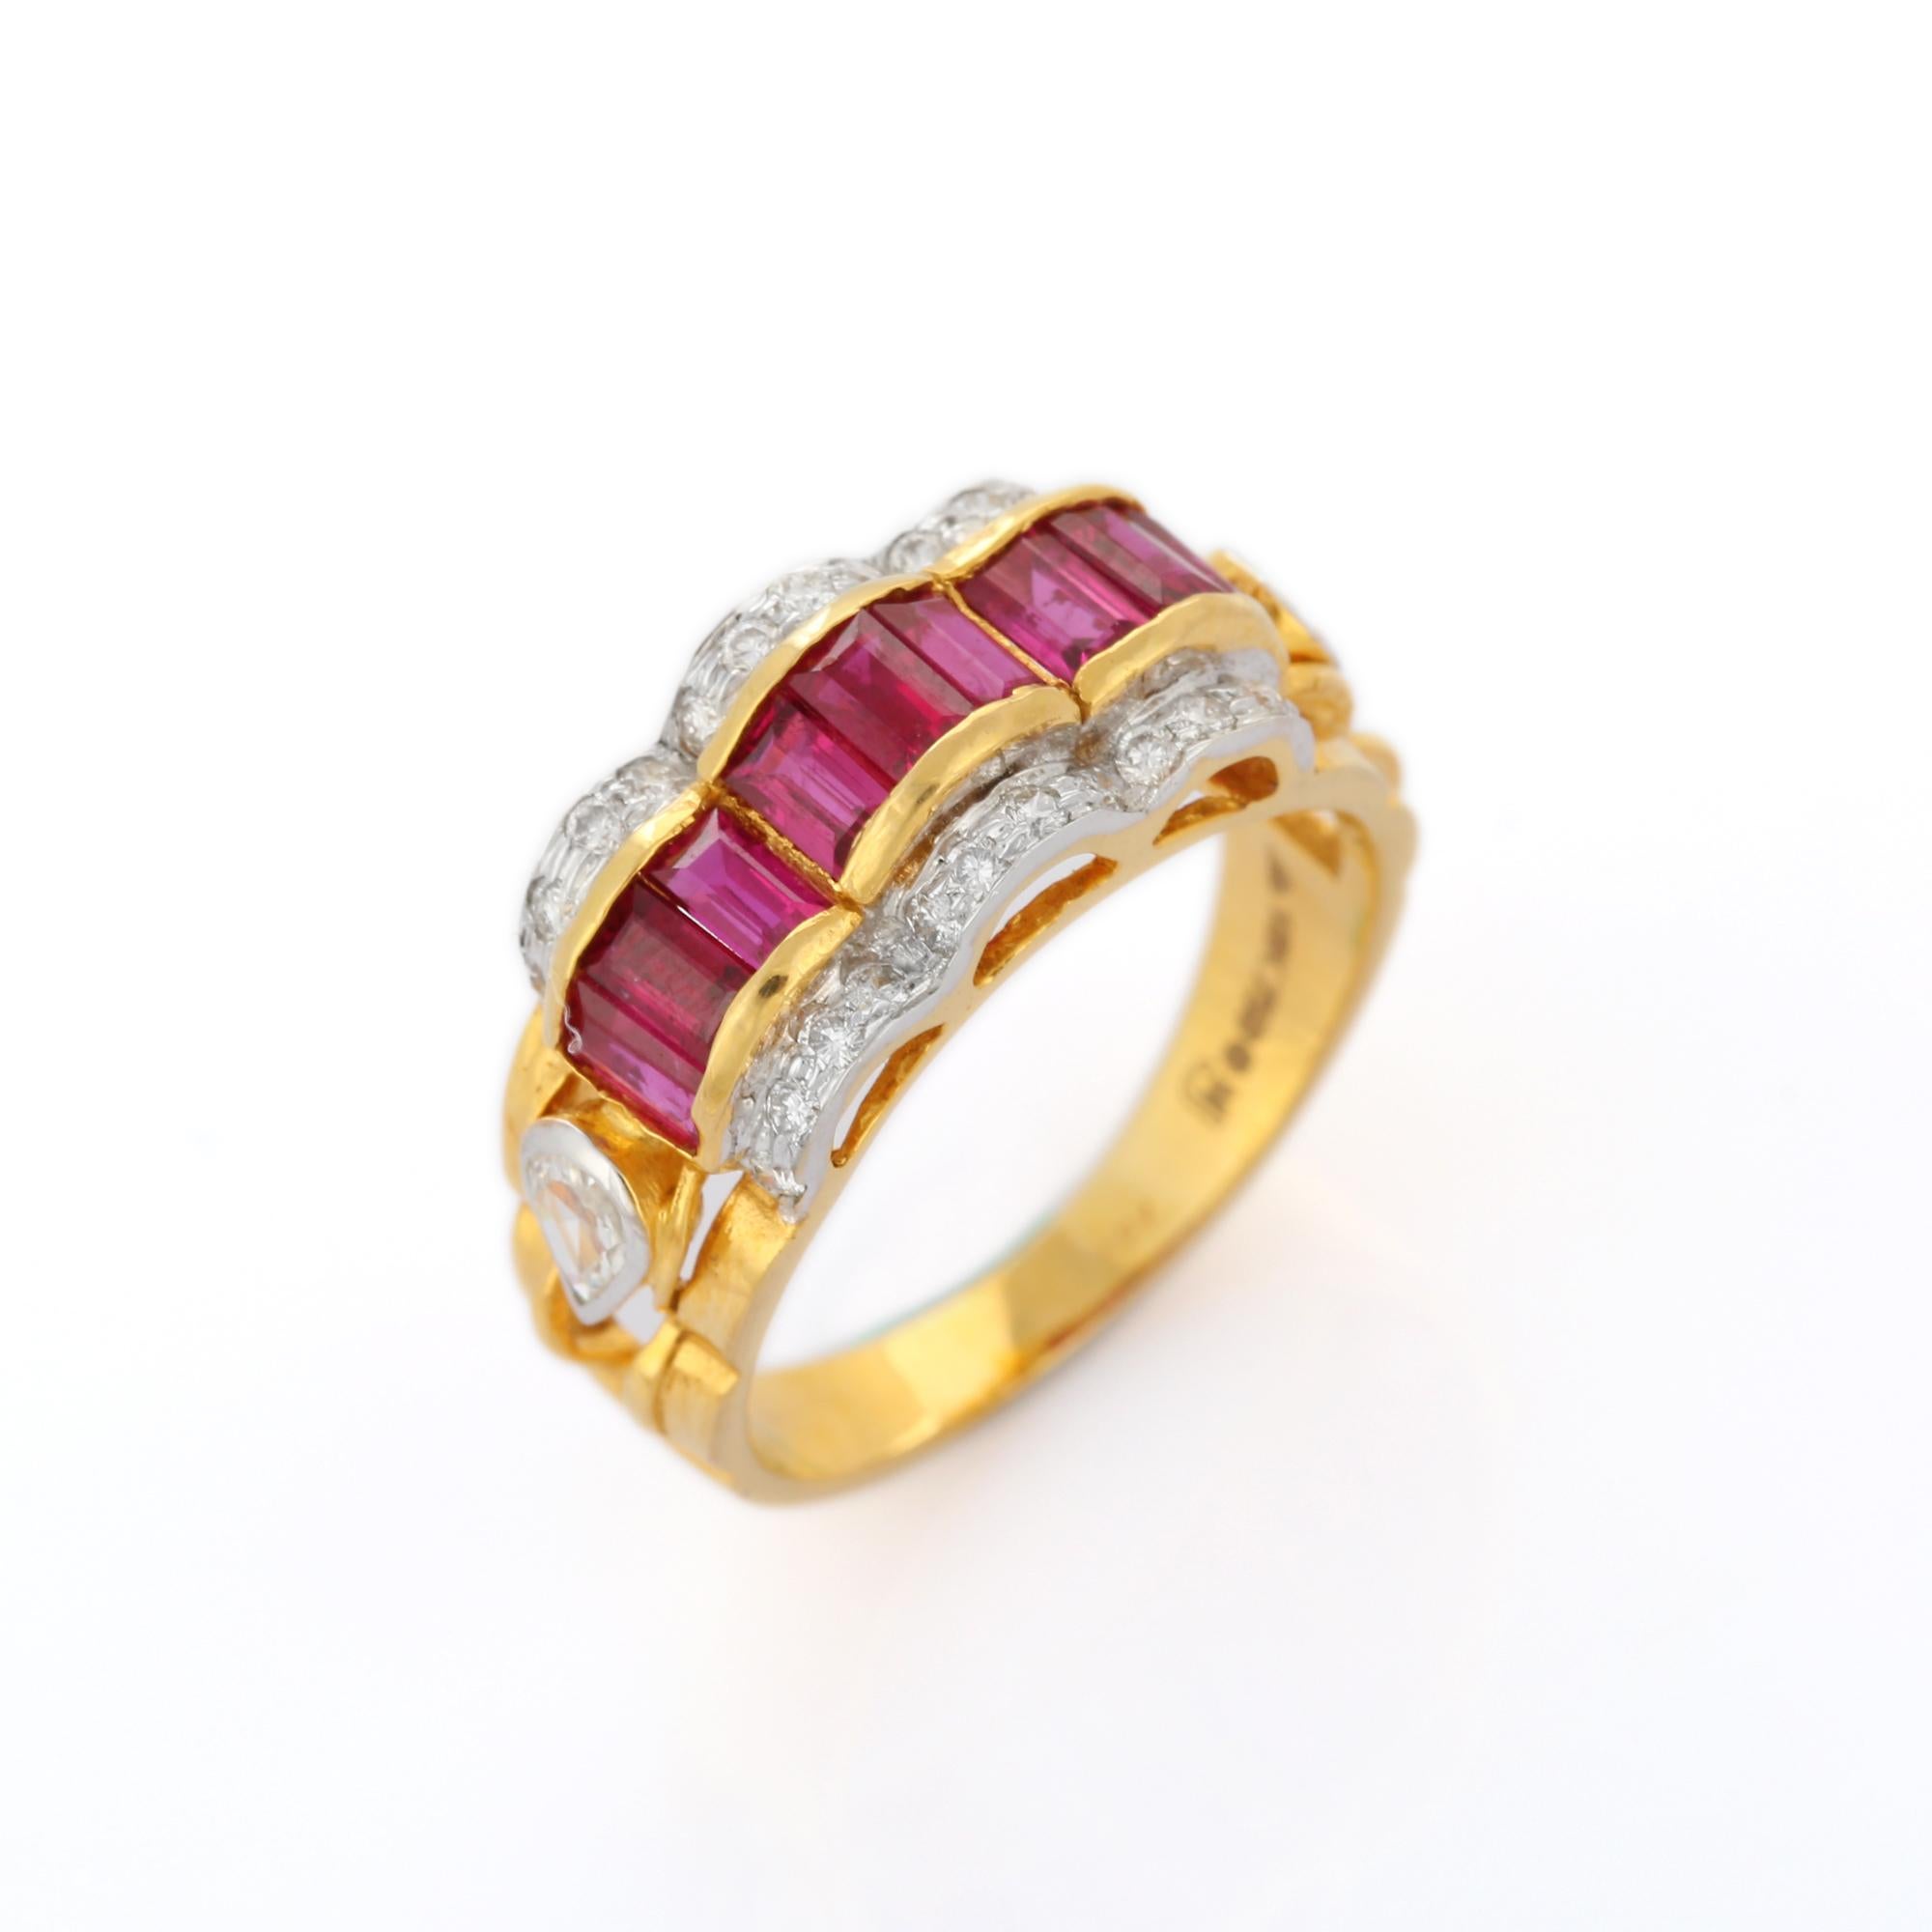 For Sale:  Contemporary 2.7 ct Ruby and Diamond Wedding Ring in 18K Yellow Gold 5